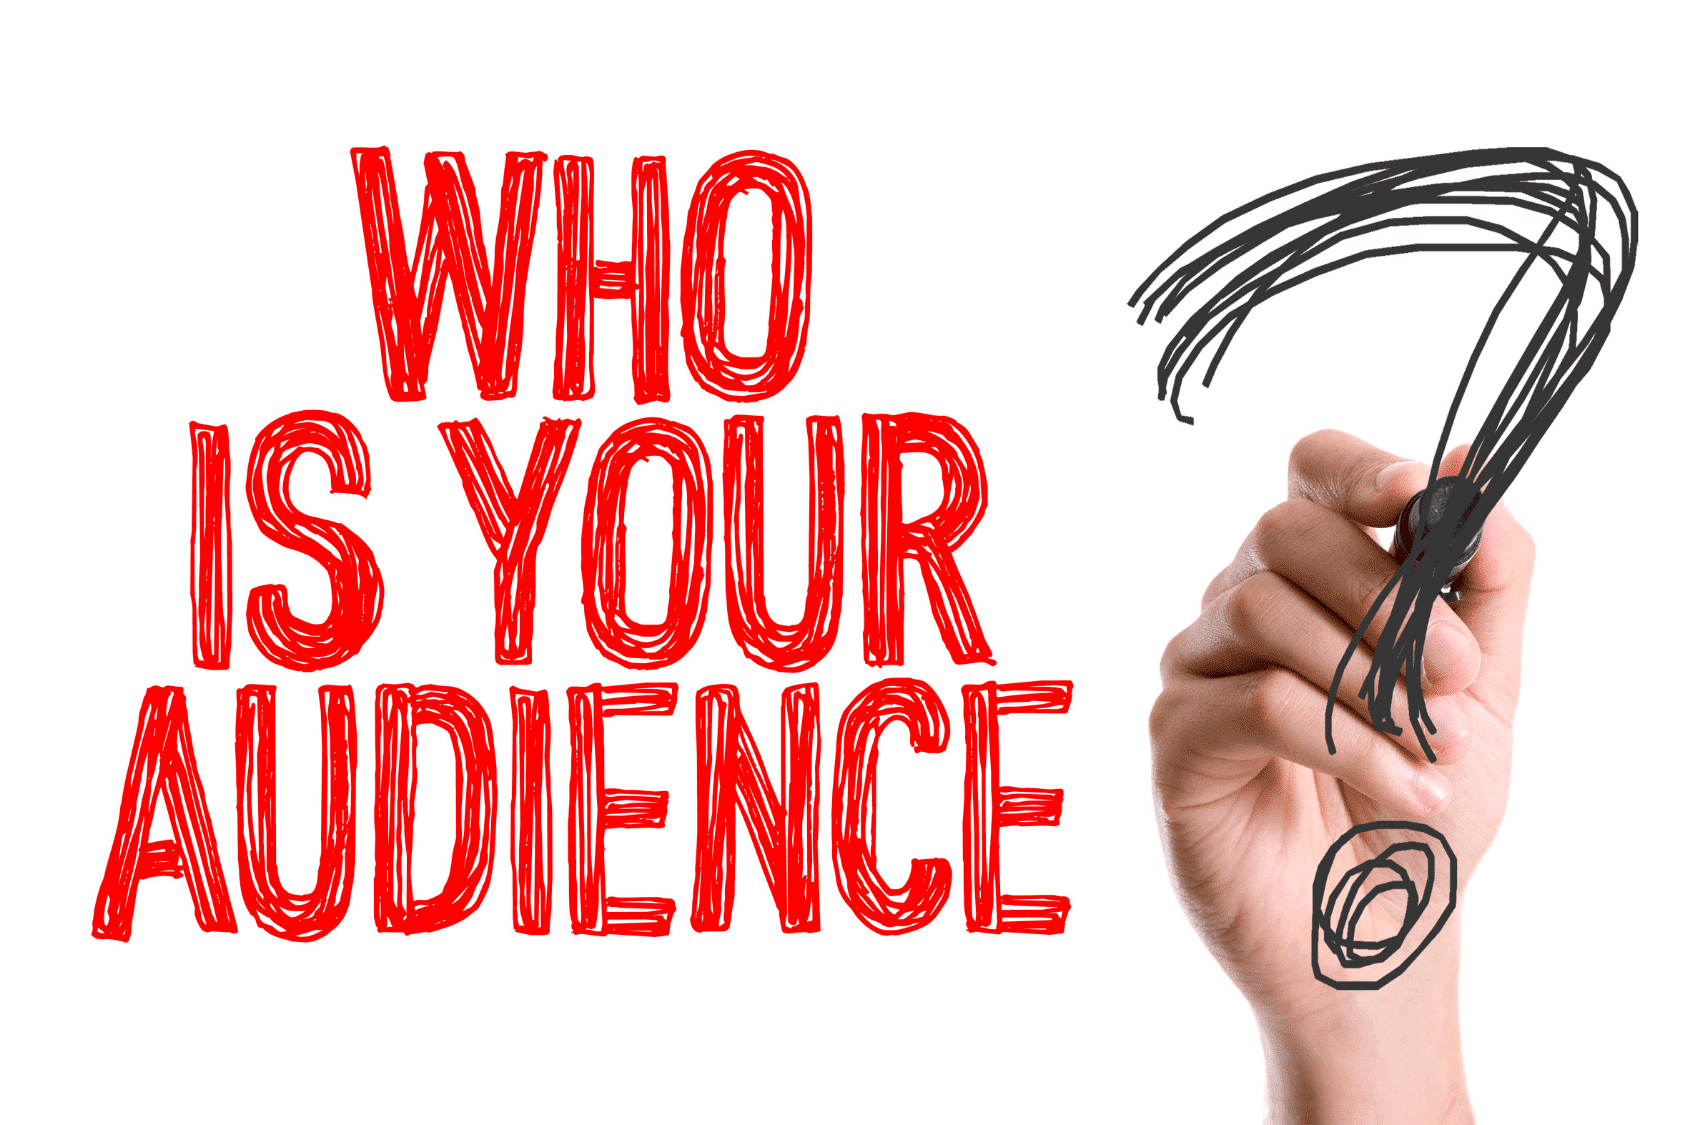 A hand writing with marker "Who Is Your Audience?" on a transparent surface.